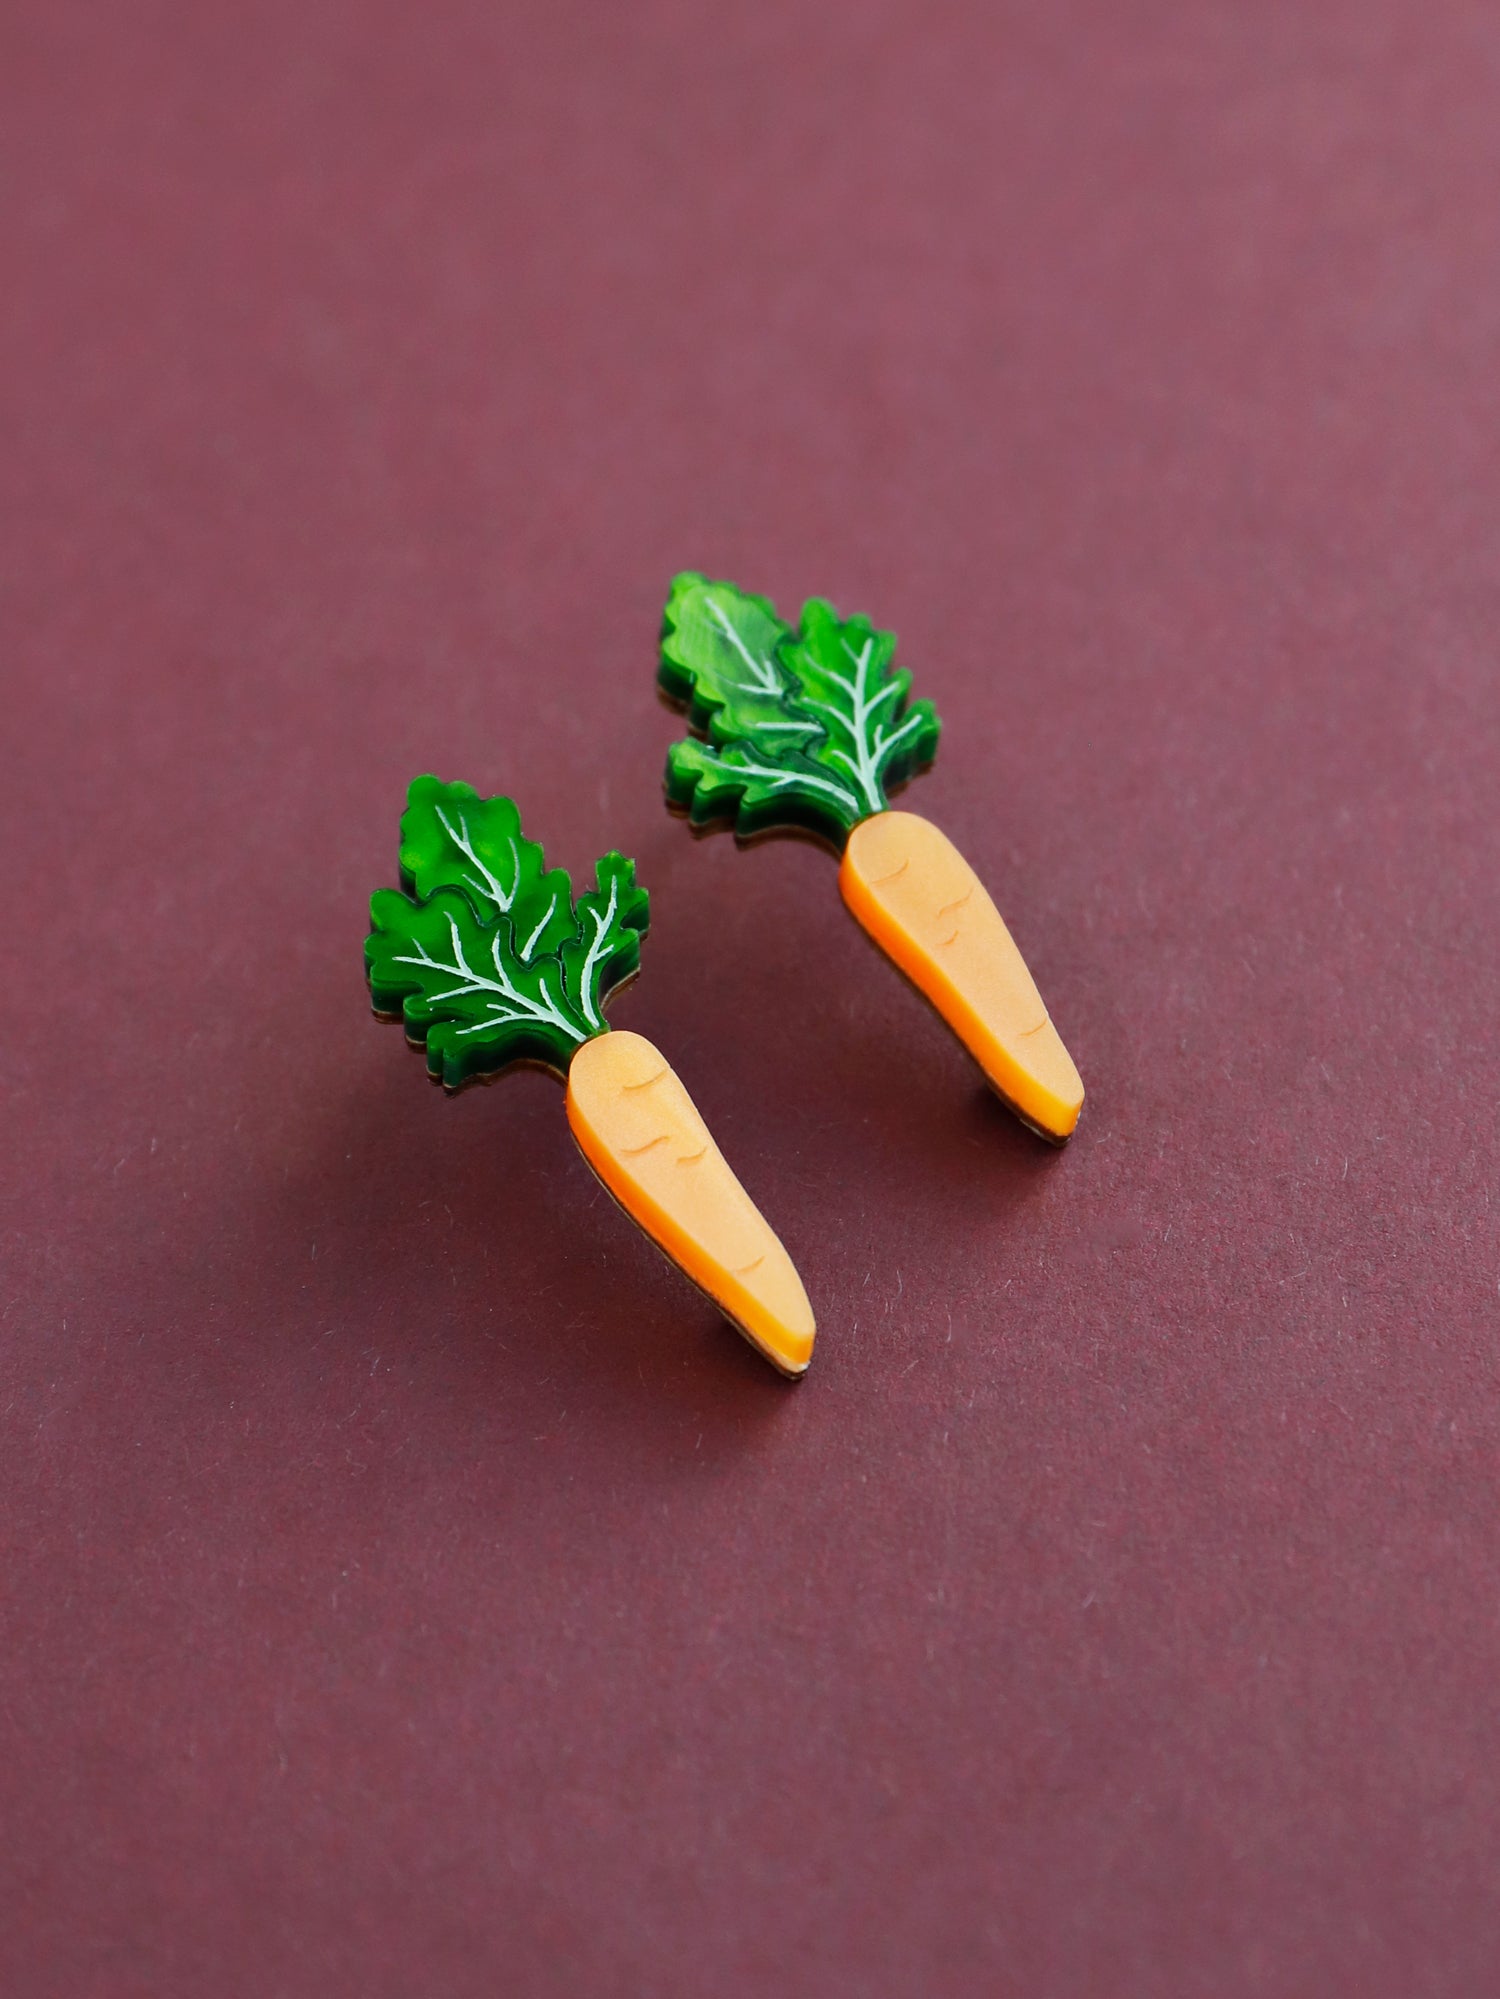 Orange and green carrot stud acrylic earrings with silver posts. Handmade in London by Wolf & Moon.